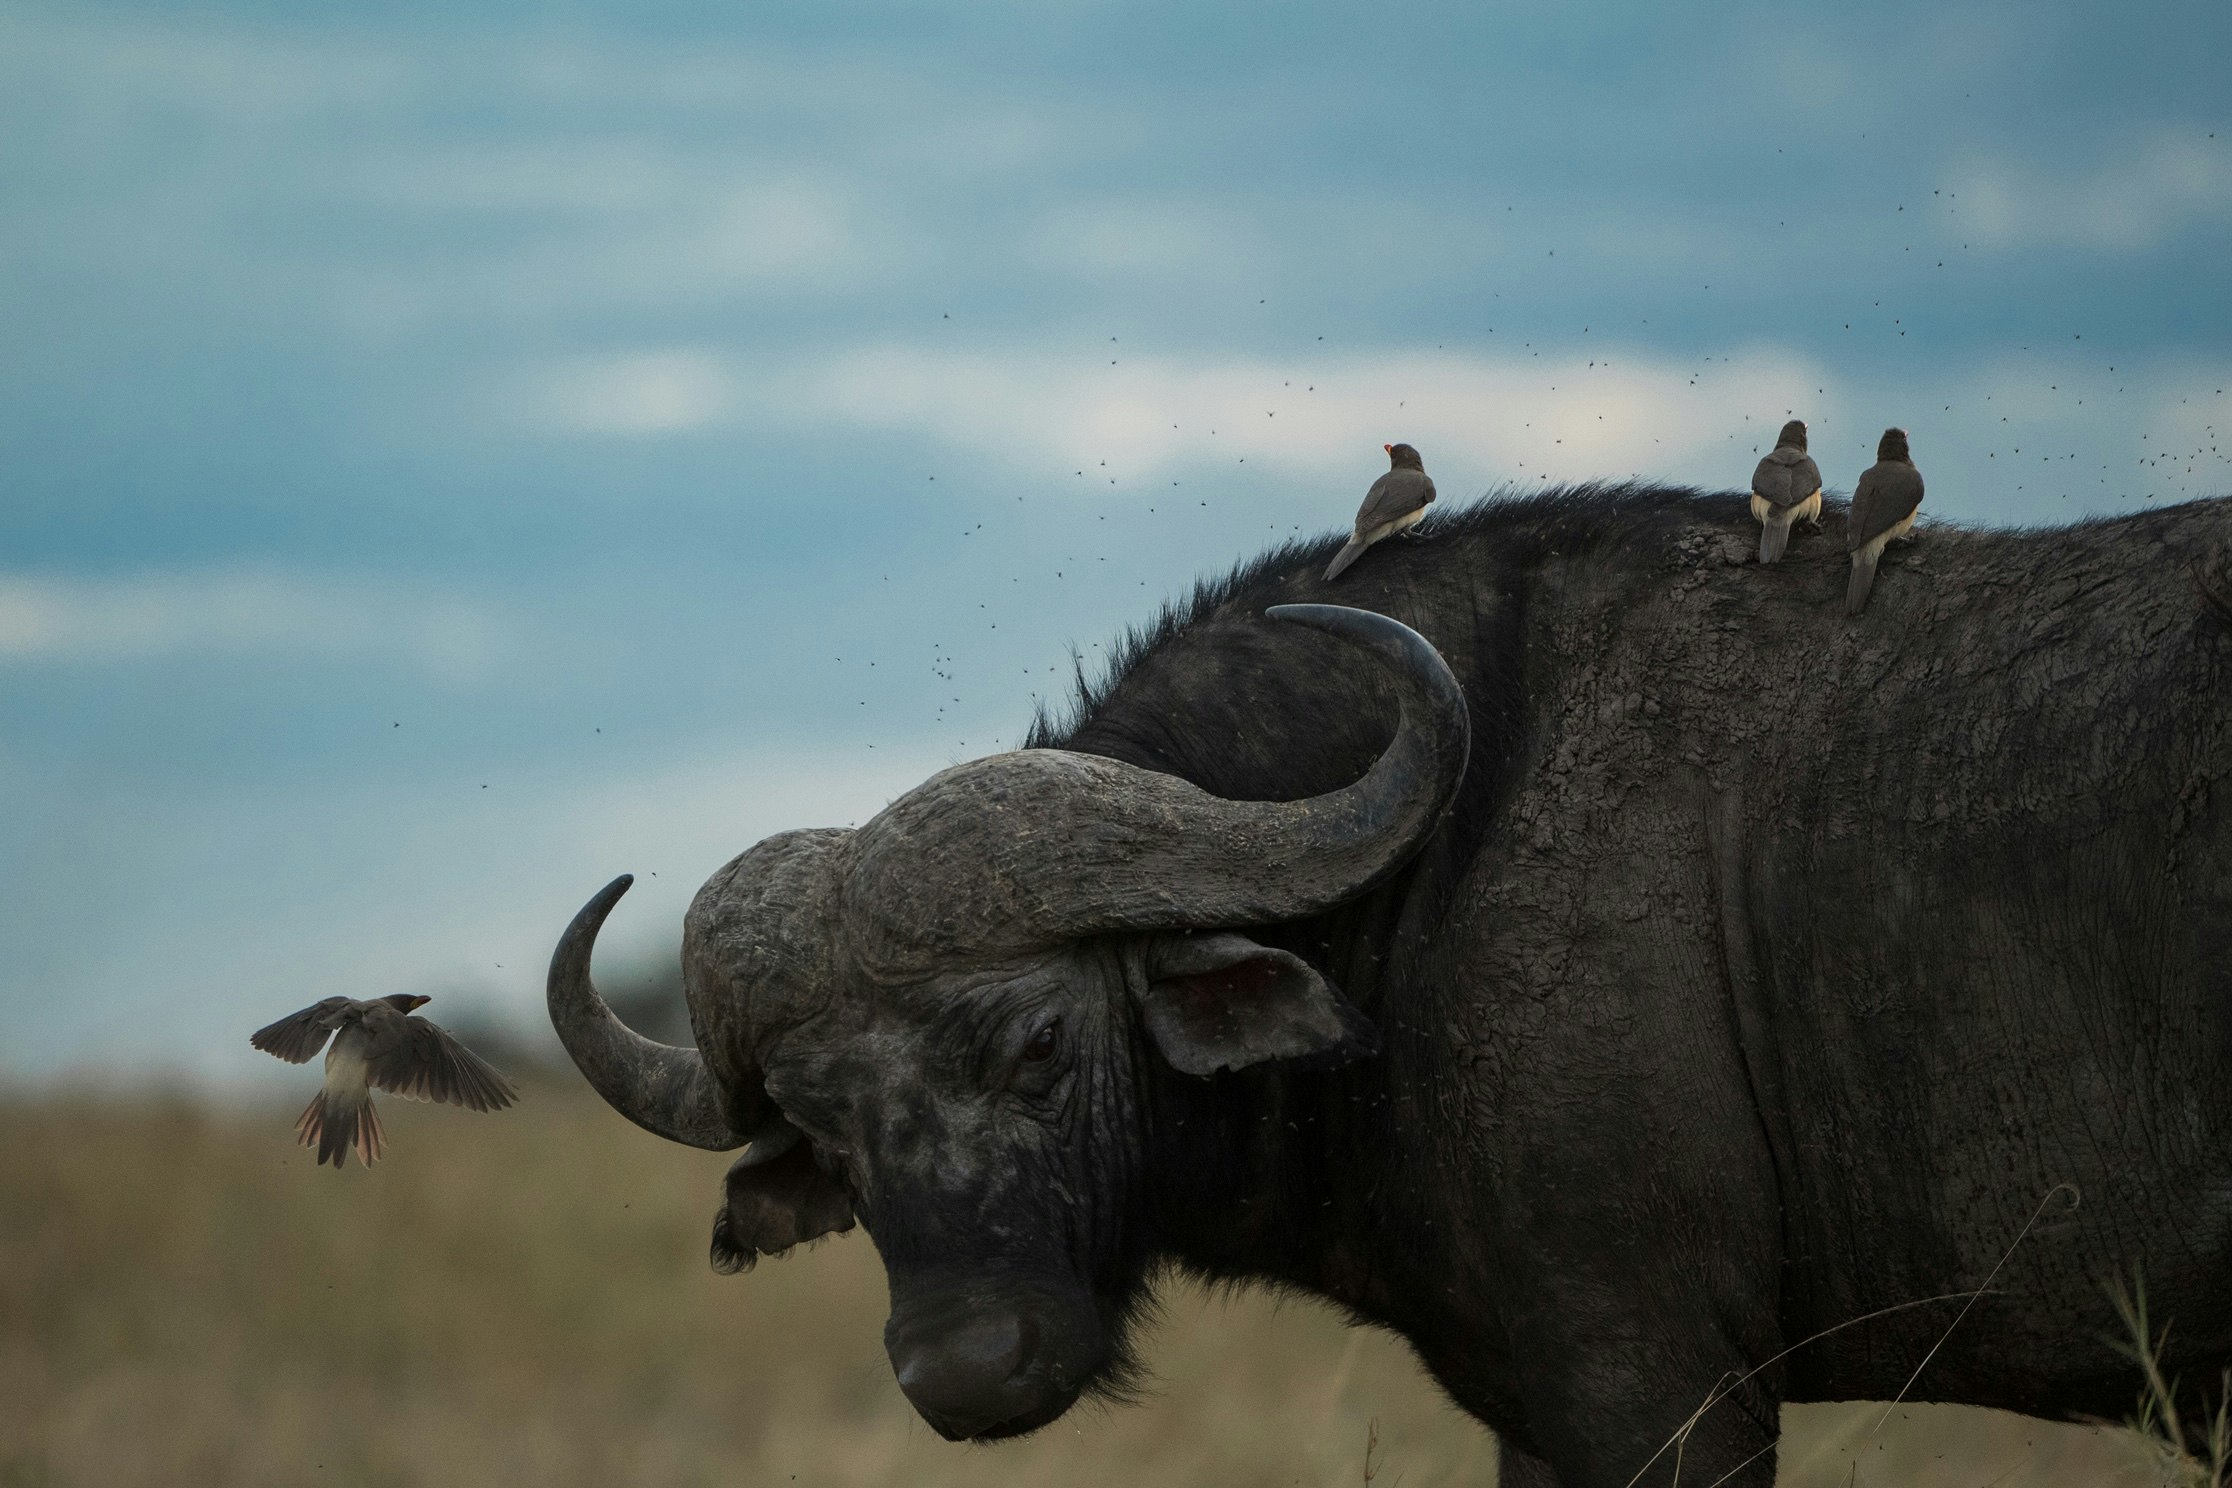 Birds hitch a ride on the back of a buffalo